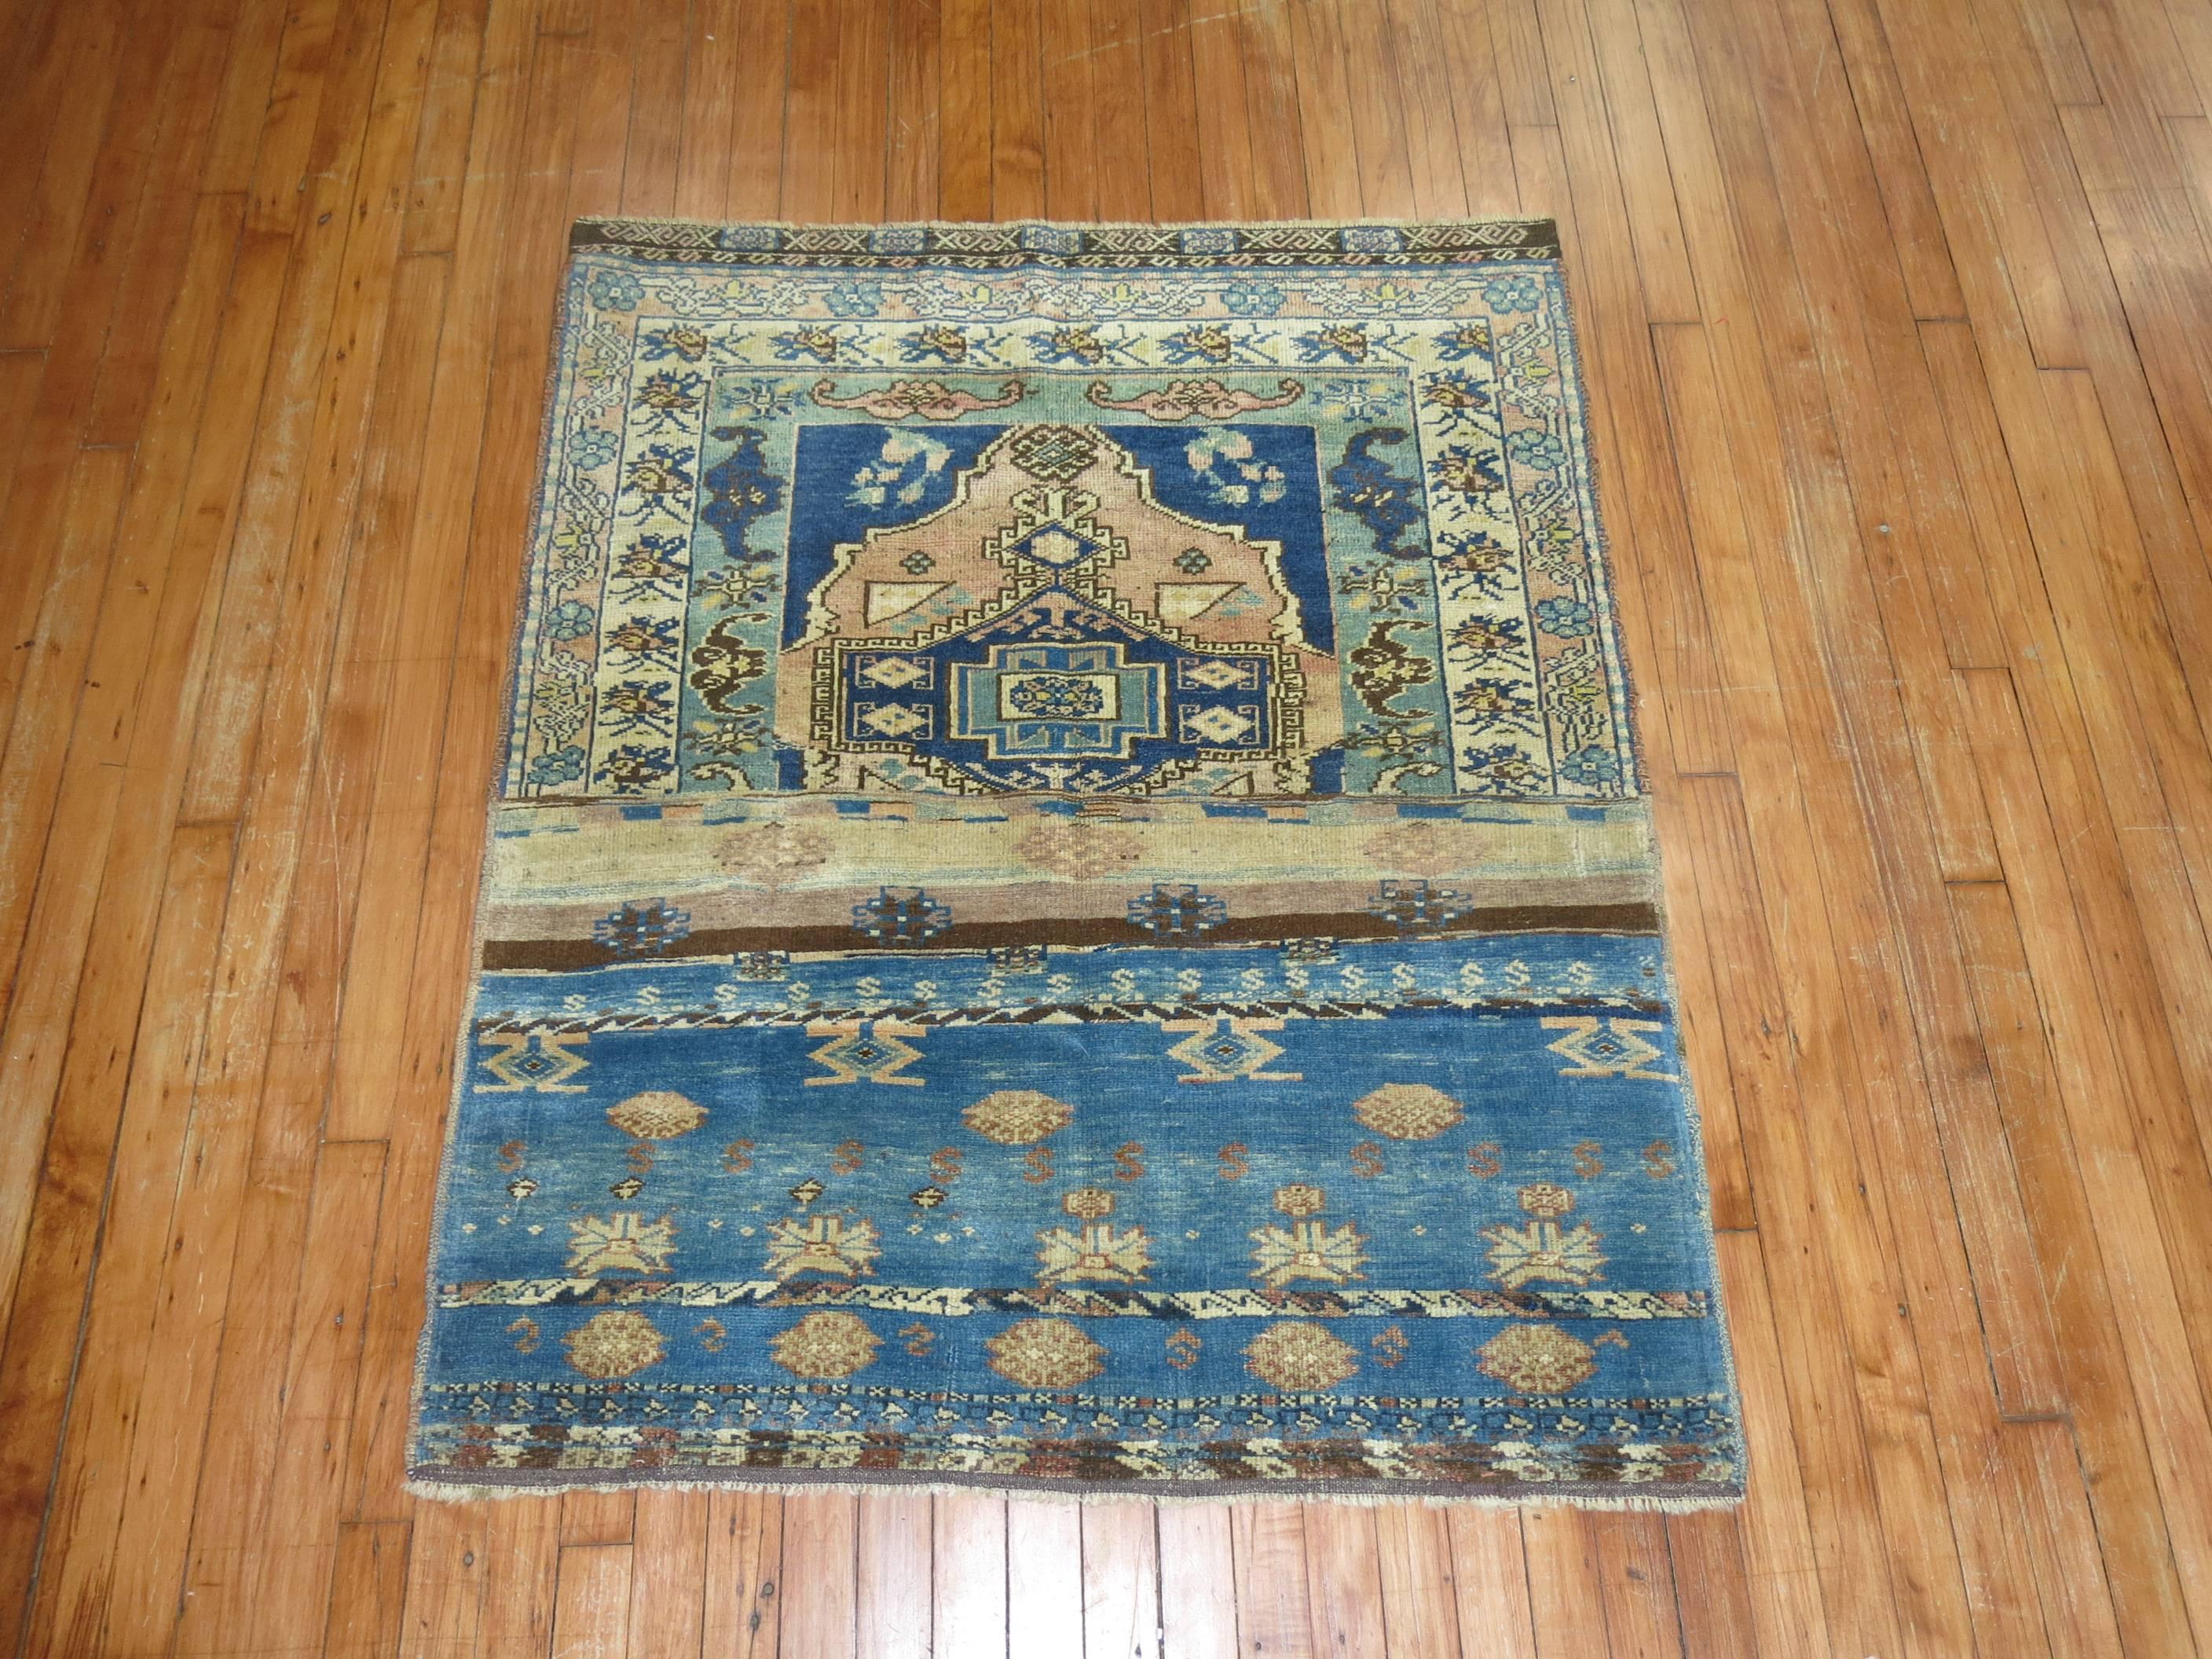 Sultanabad Eclectic Green Denim Blue Sampler Rug, 20th Century For Sale